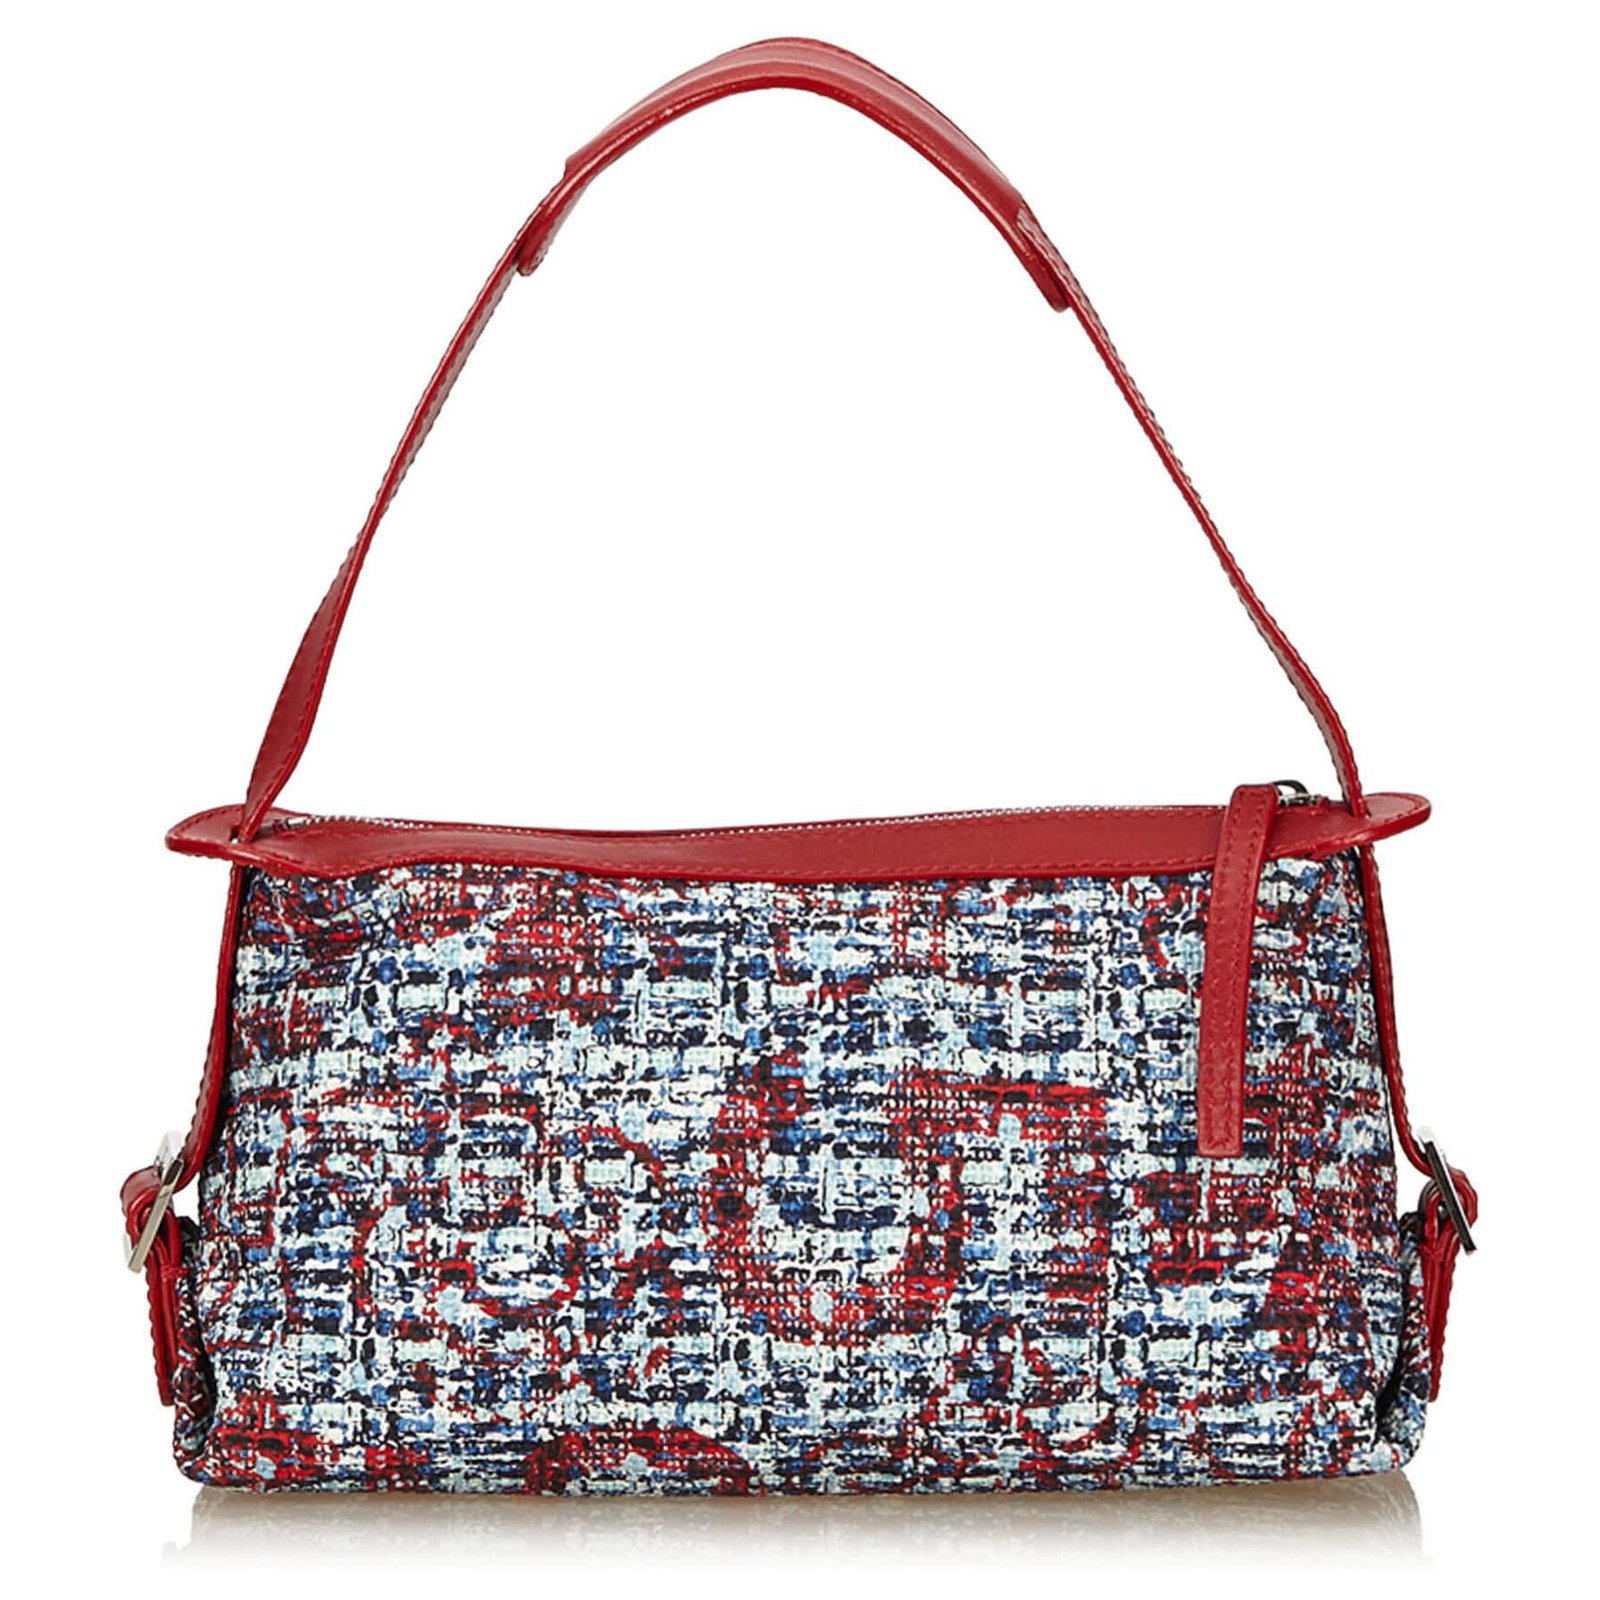 Chanel Duffle Bag Clover Red Tweed Silver